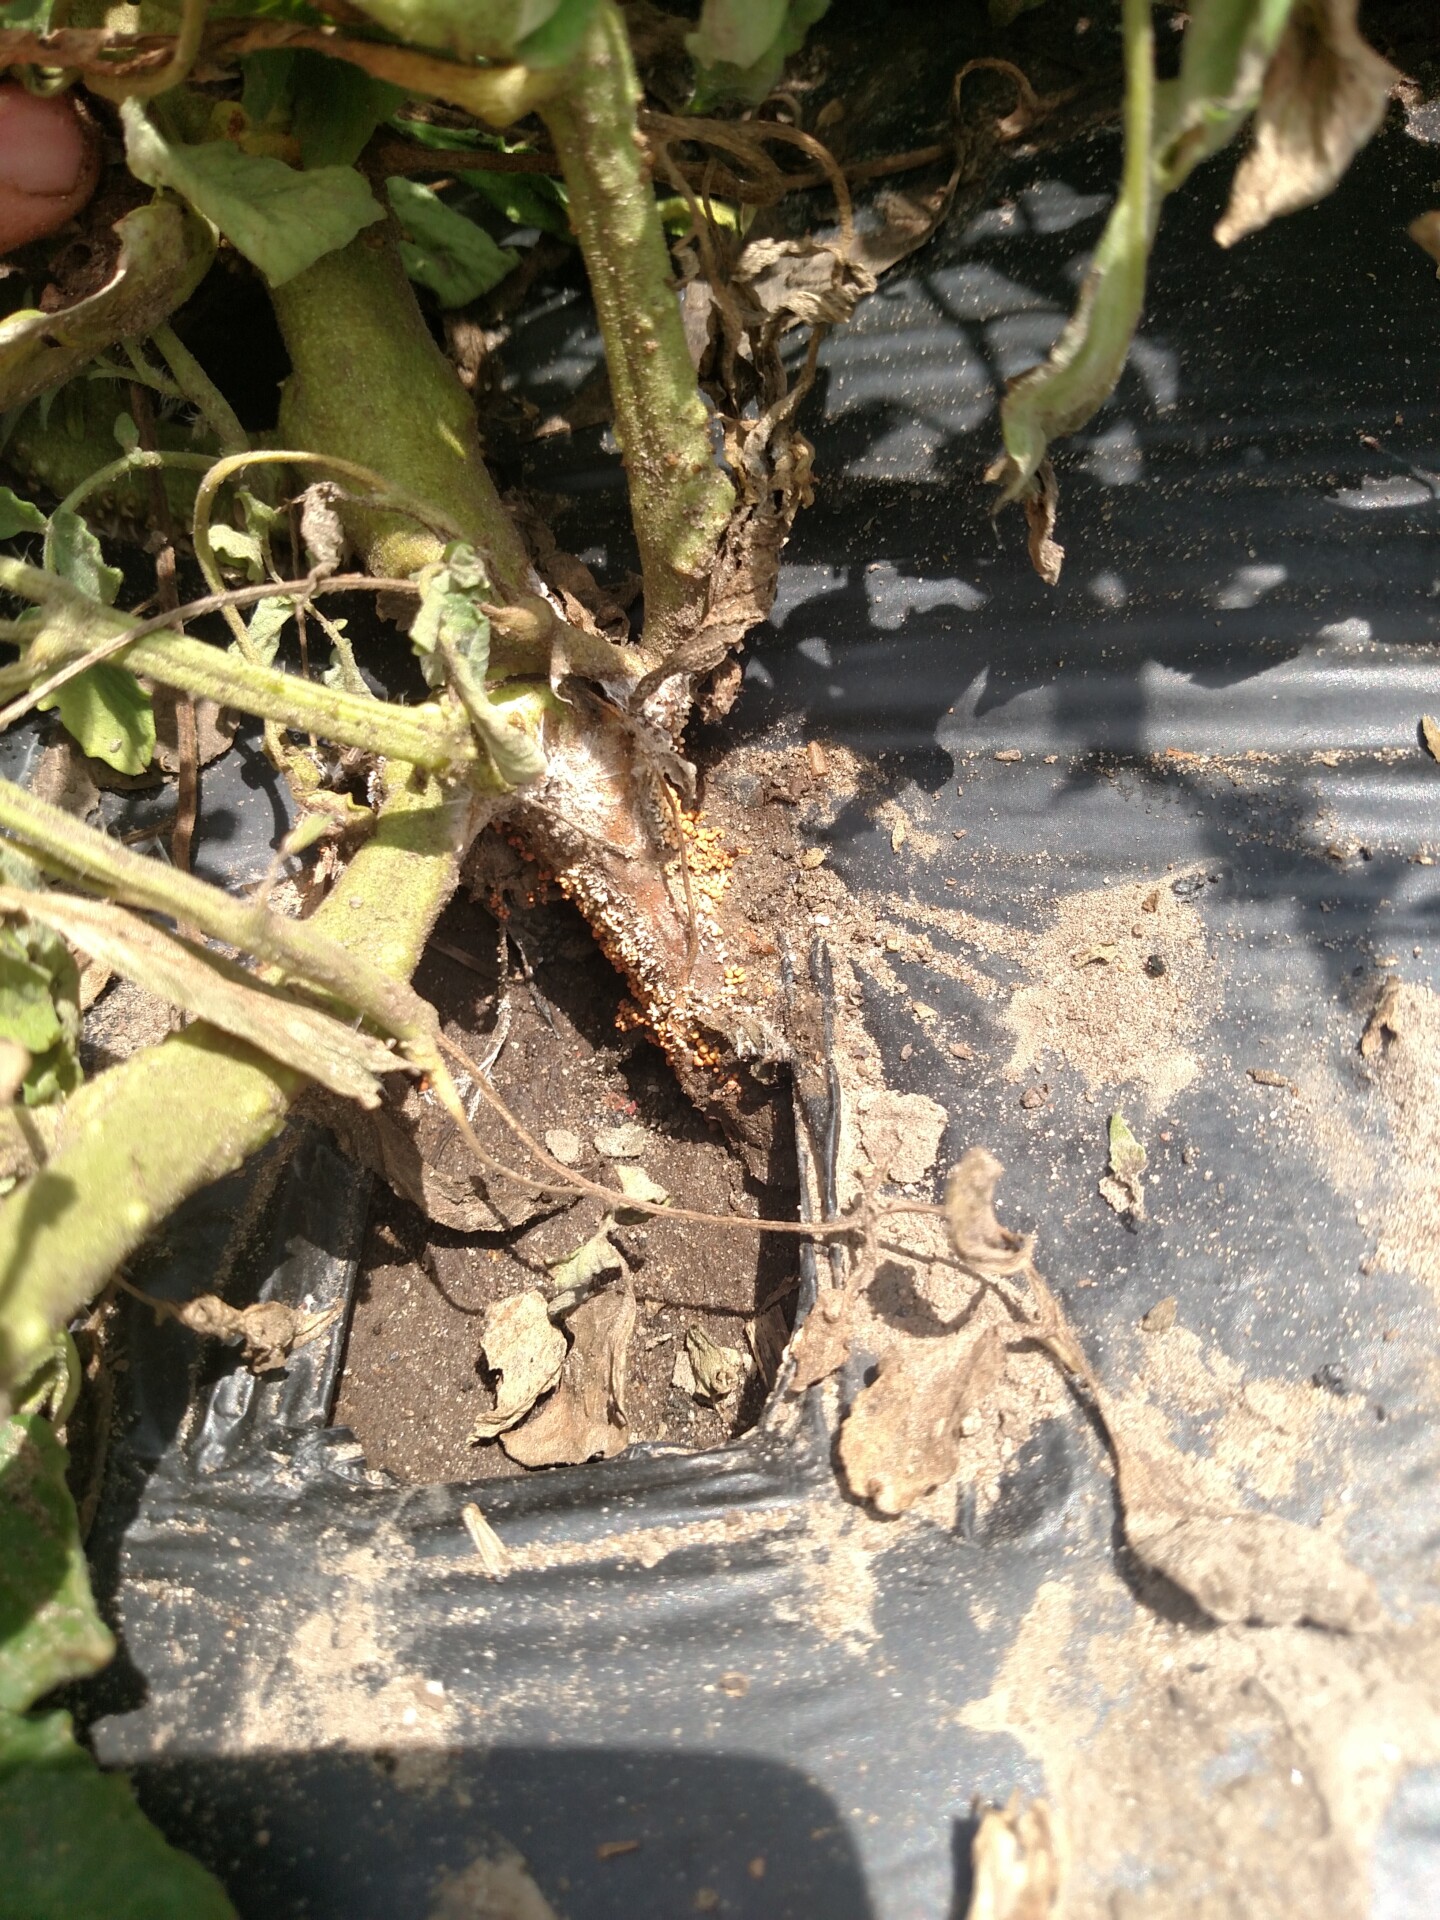 Southern blight can be recognized by the small sclerotia at the base of the stem.